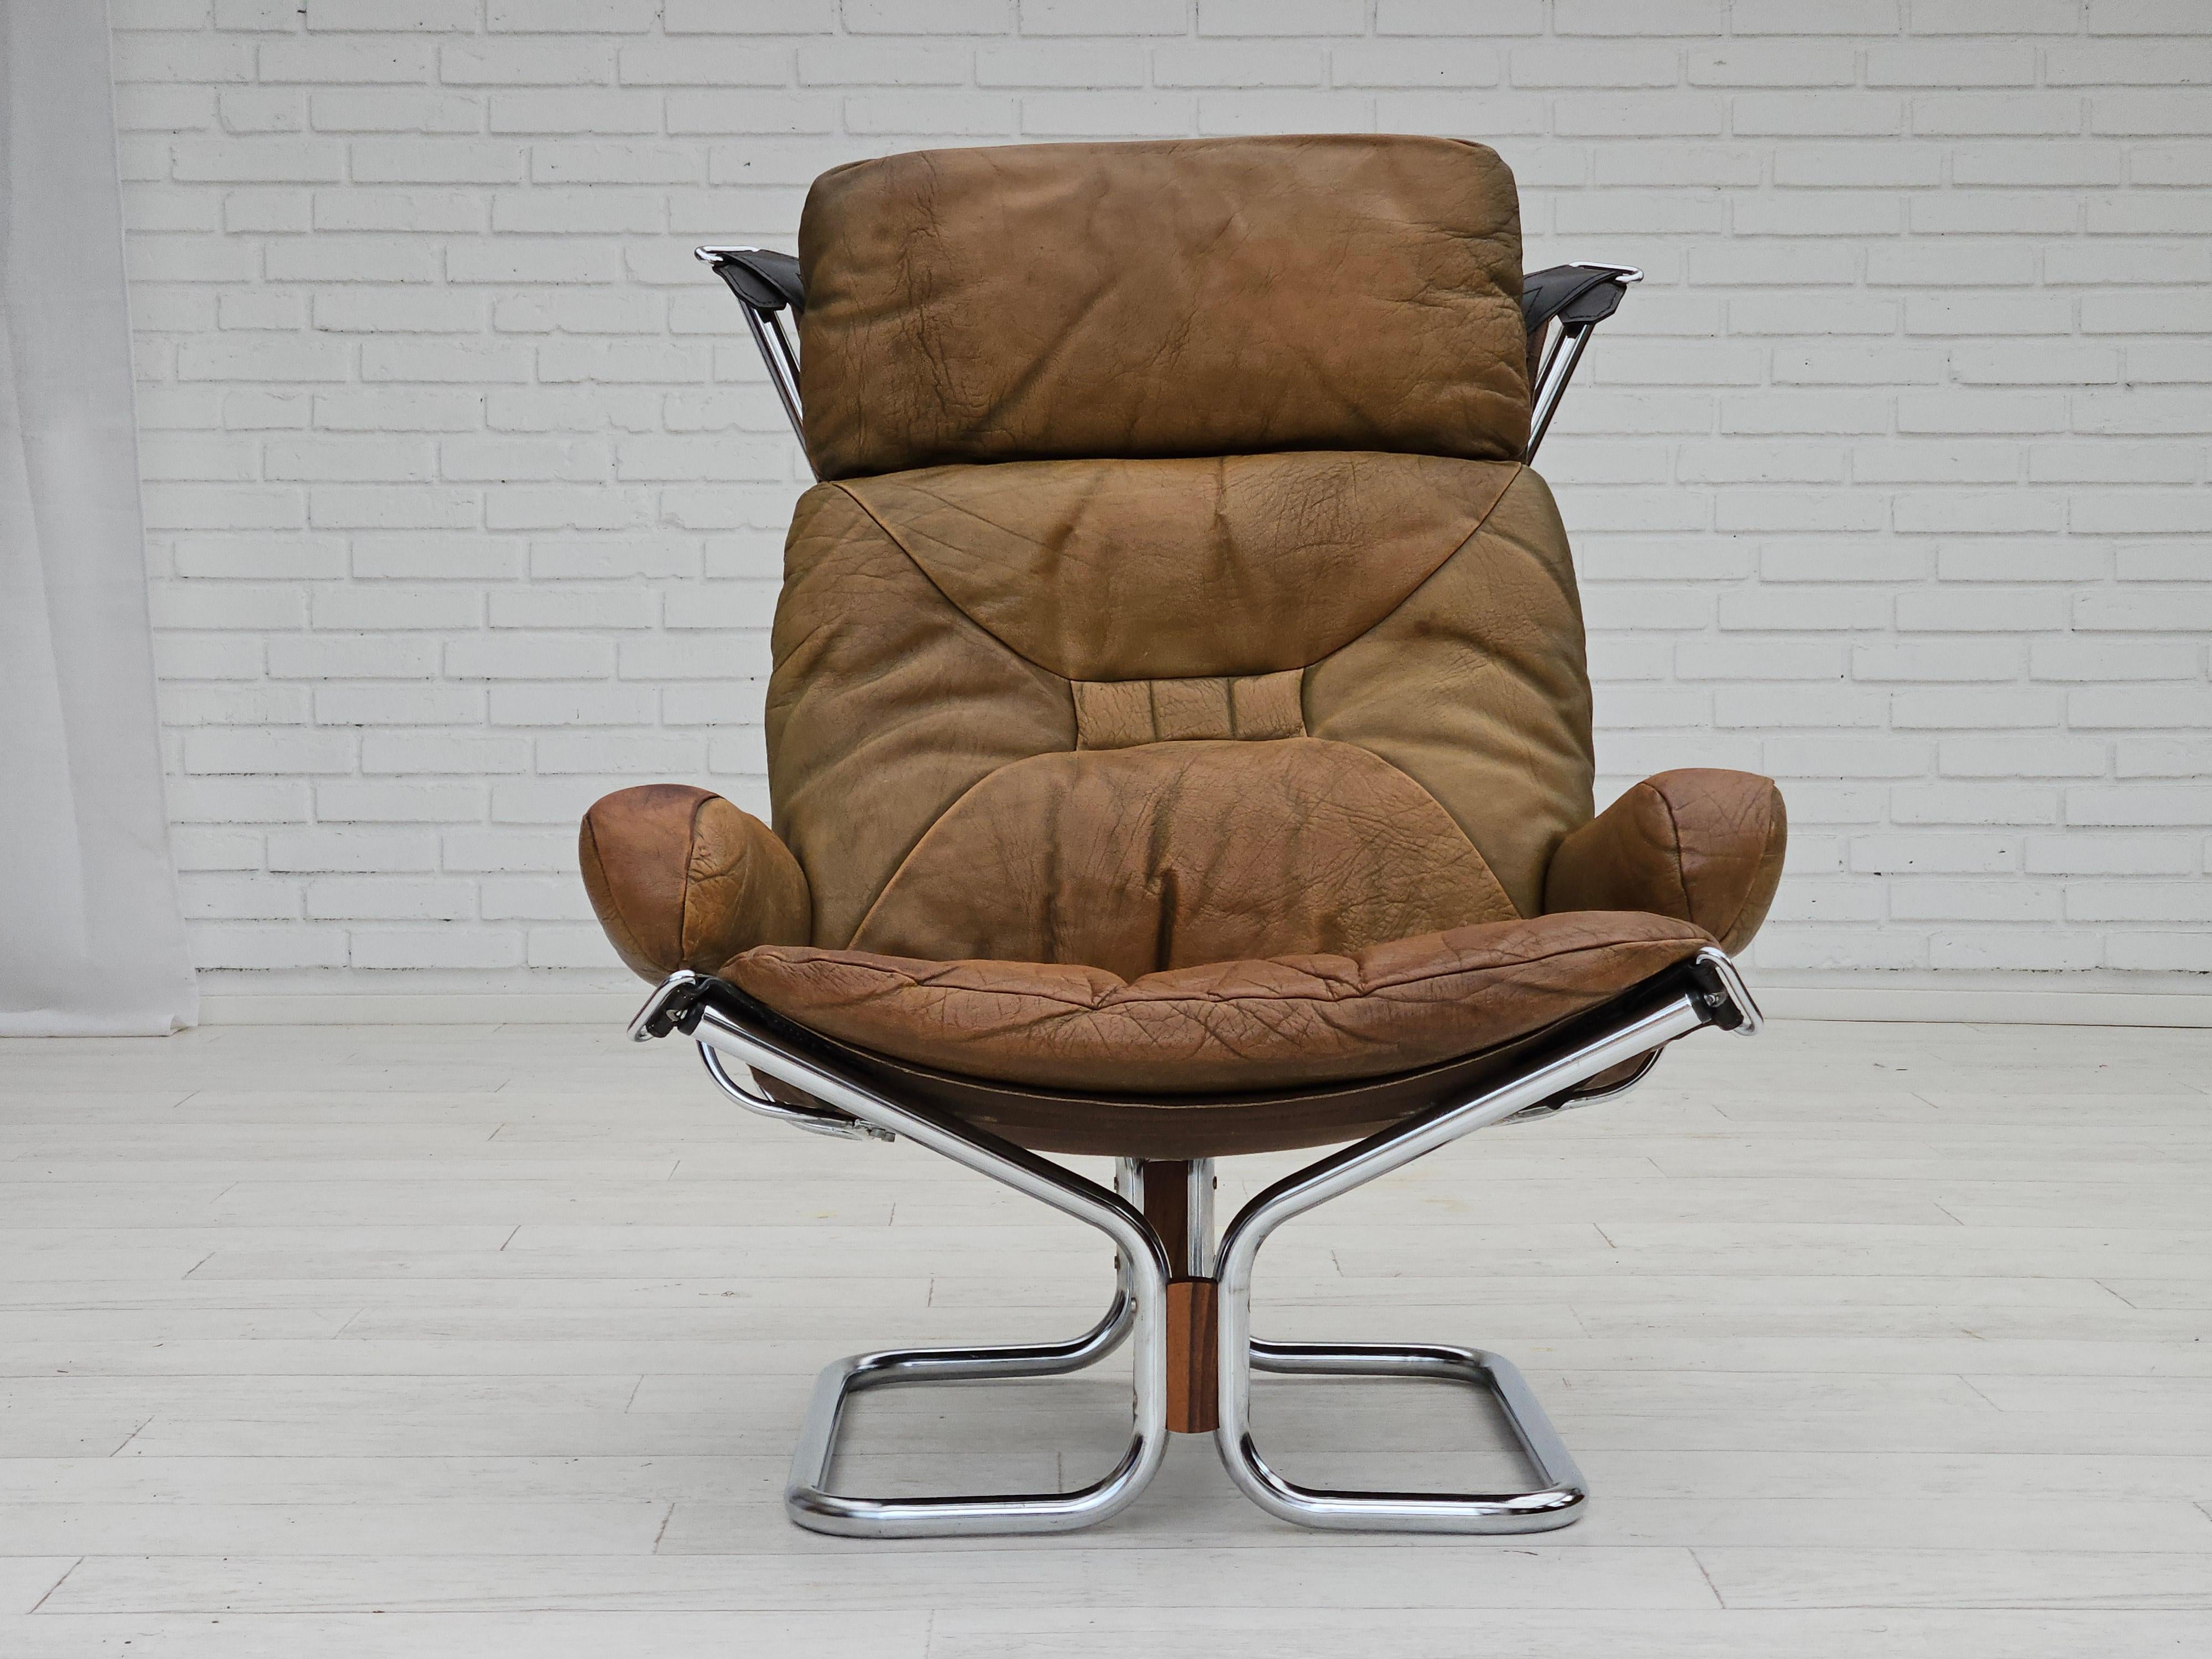 1970s, Norwegian design by Harald Relling. Original very good condition with patina: no smells and no stains. Original brown leather, chrome steel, teakwood, canvas. Manufactured by Norwegian furniture manufacturer Westnofa in about 1970s.